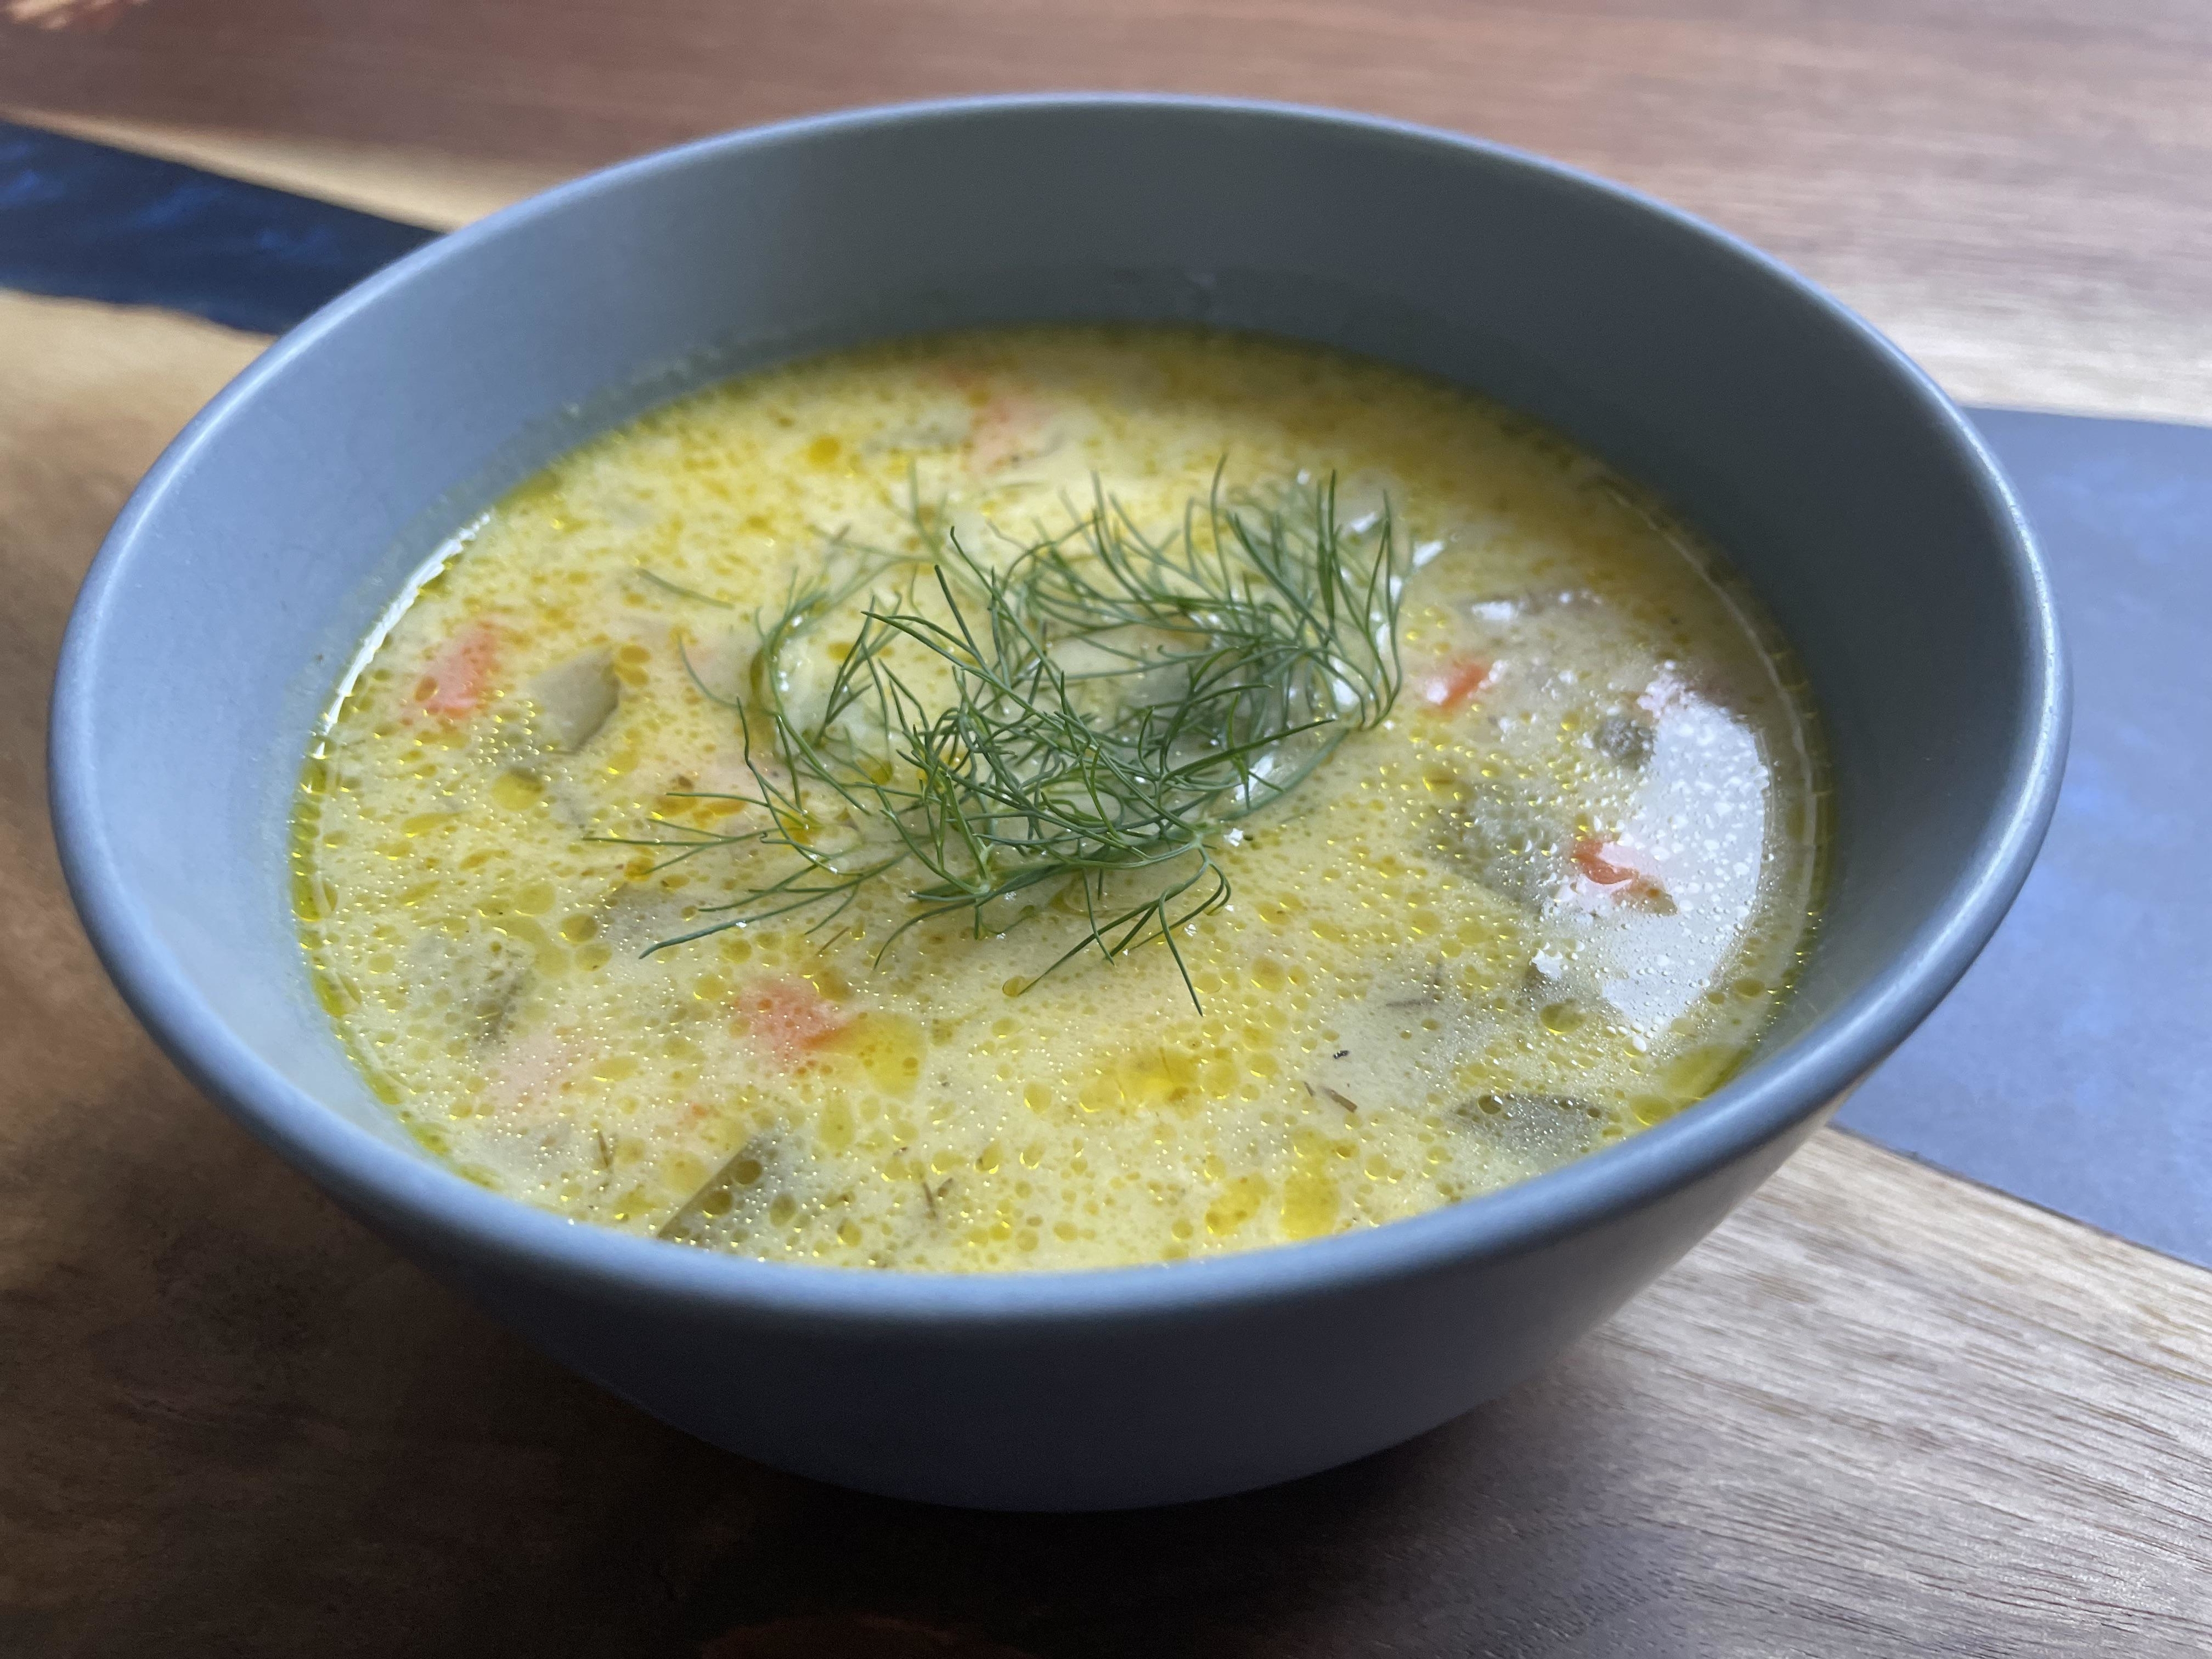 A bowl of soup with vegetables and a garnish of fresh dill on top